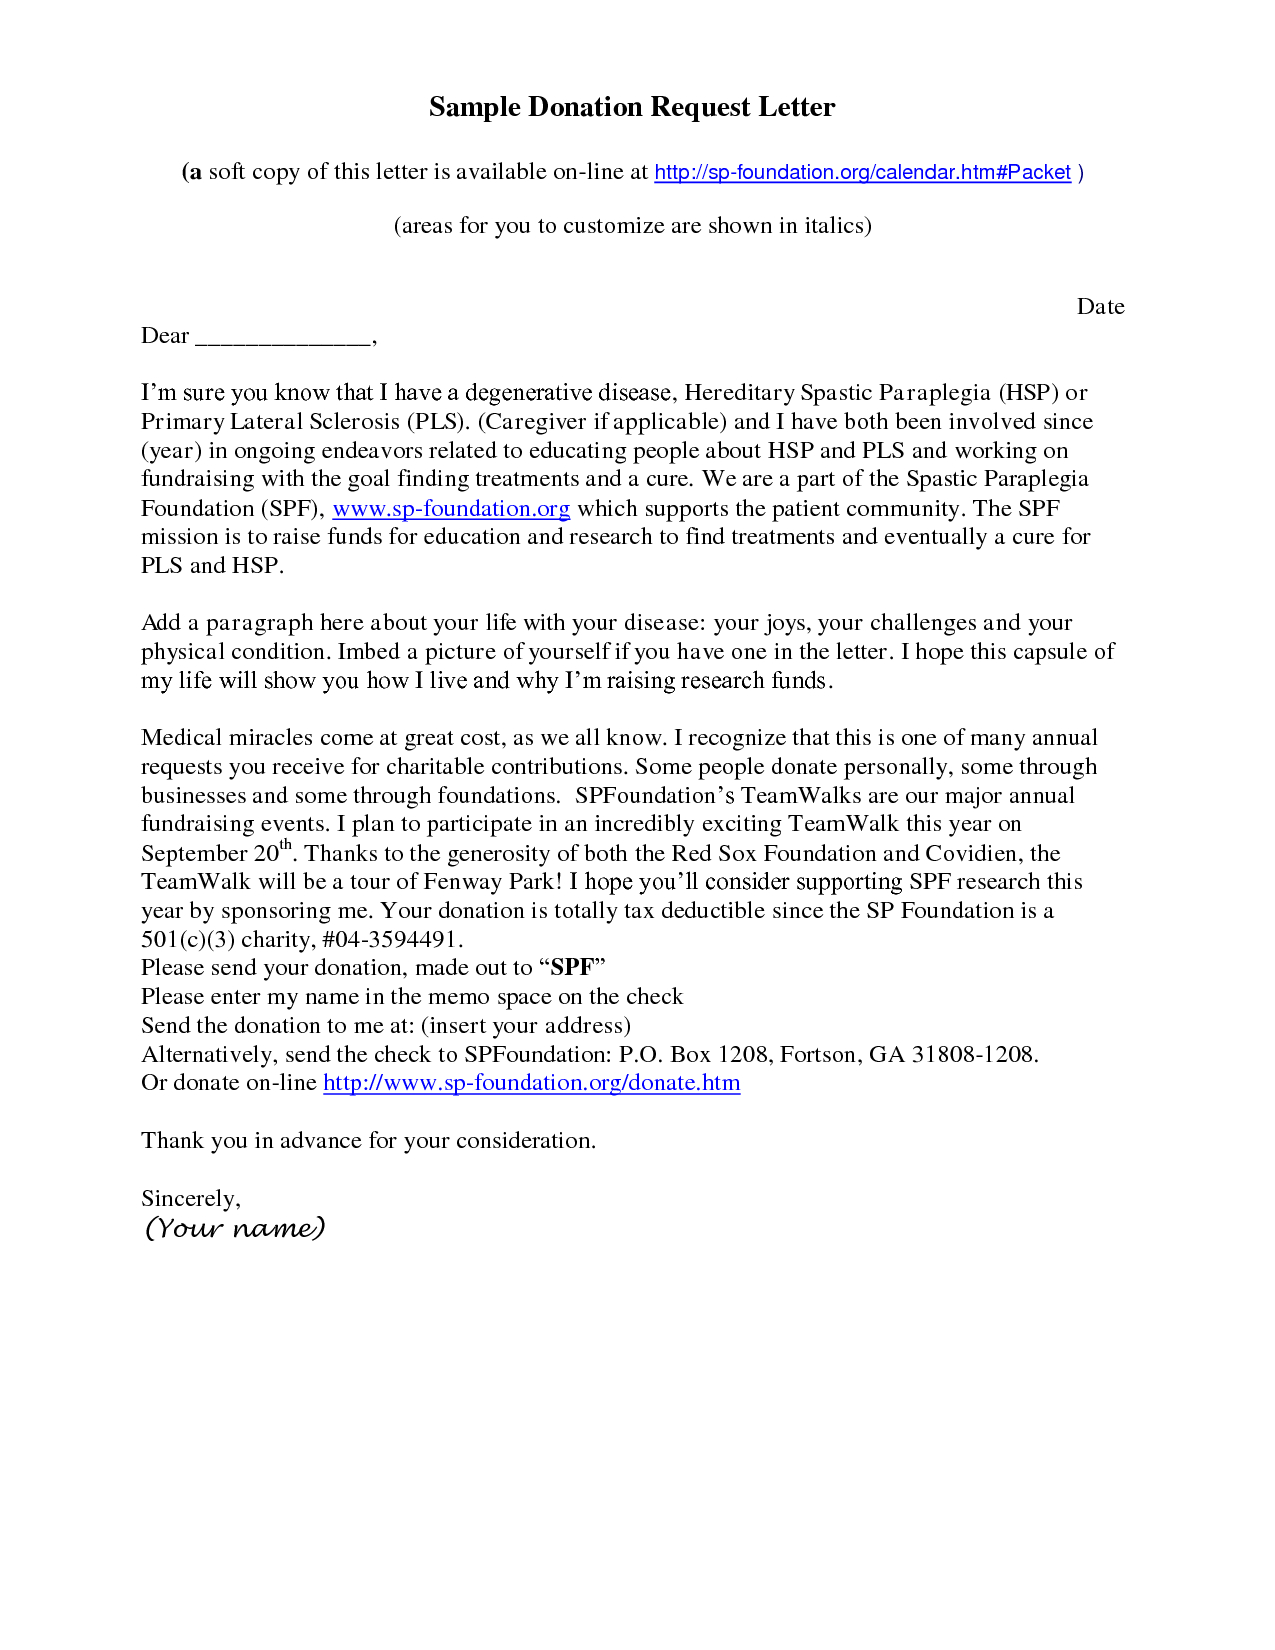 Charitable Contribution Letter Template - How to Write A solicitation Letter for Donations Choice Image